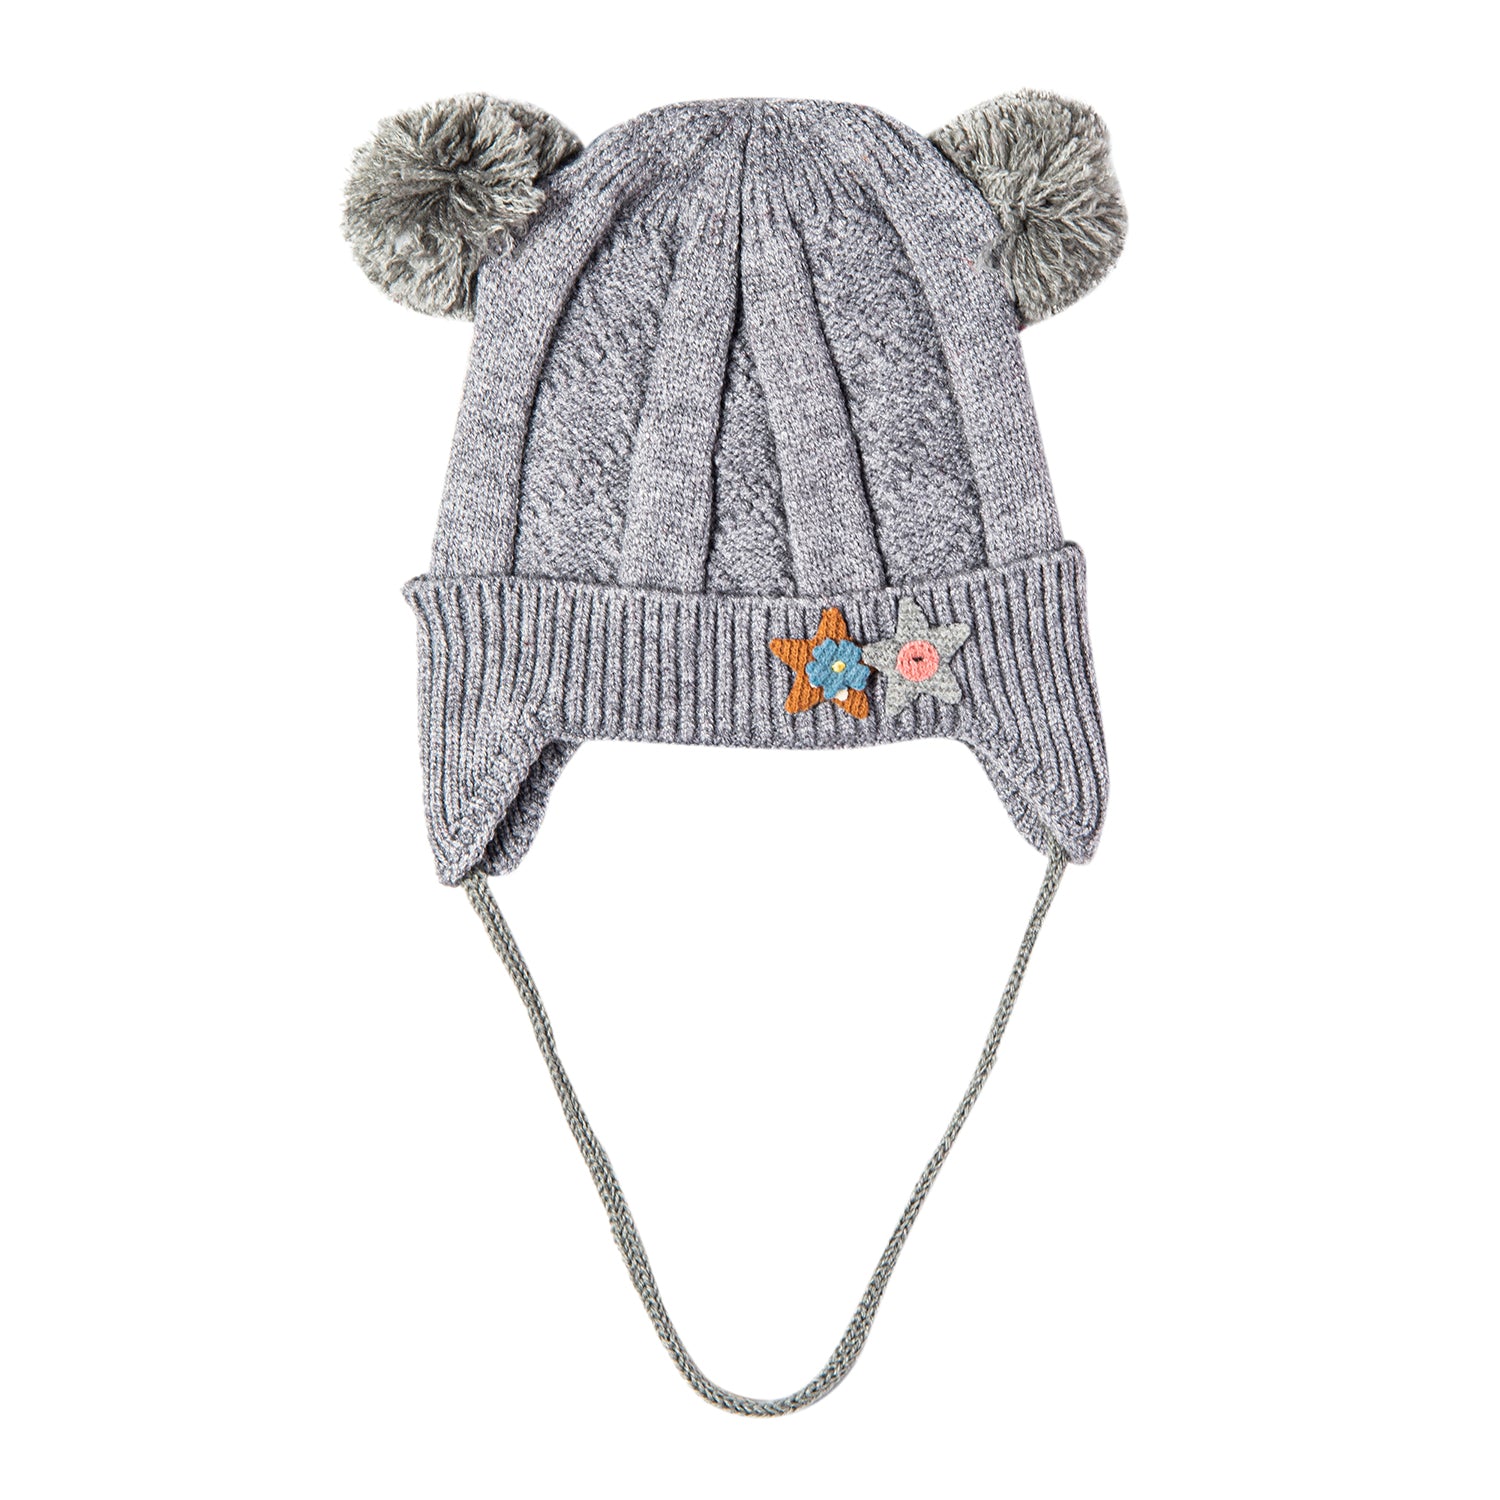 Baby Moo Knit Woollen Cap With Tie For Ear Cover Starry Pom Pom Grey